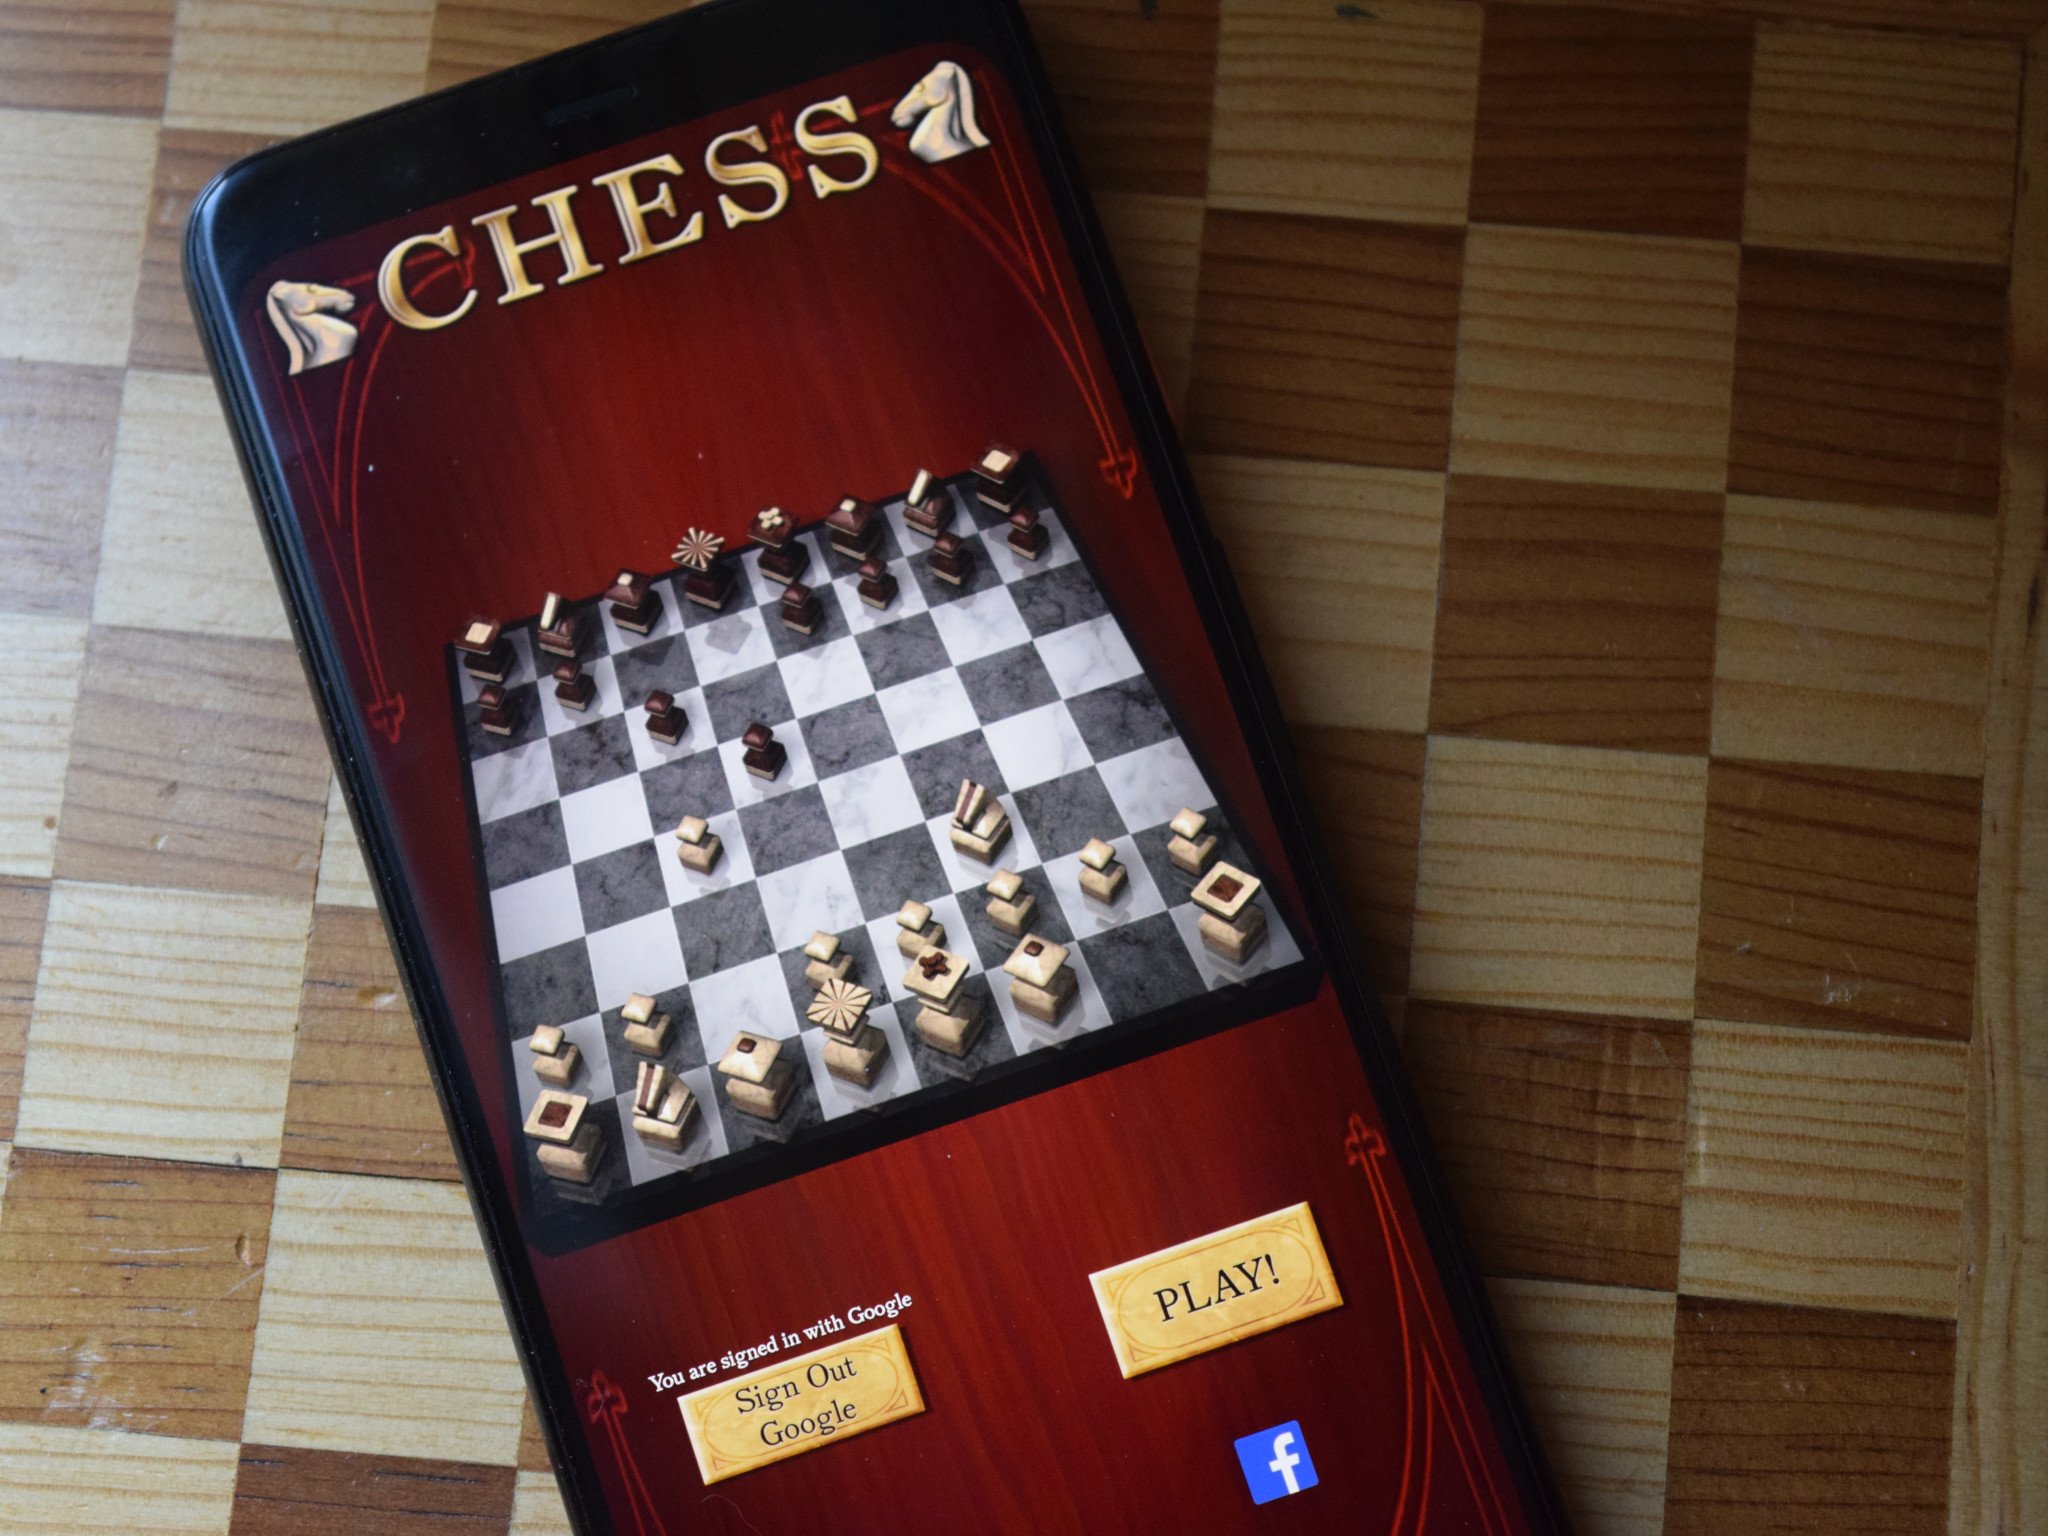 Create your own chess variant (App) - Chess Forums 